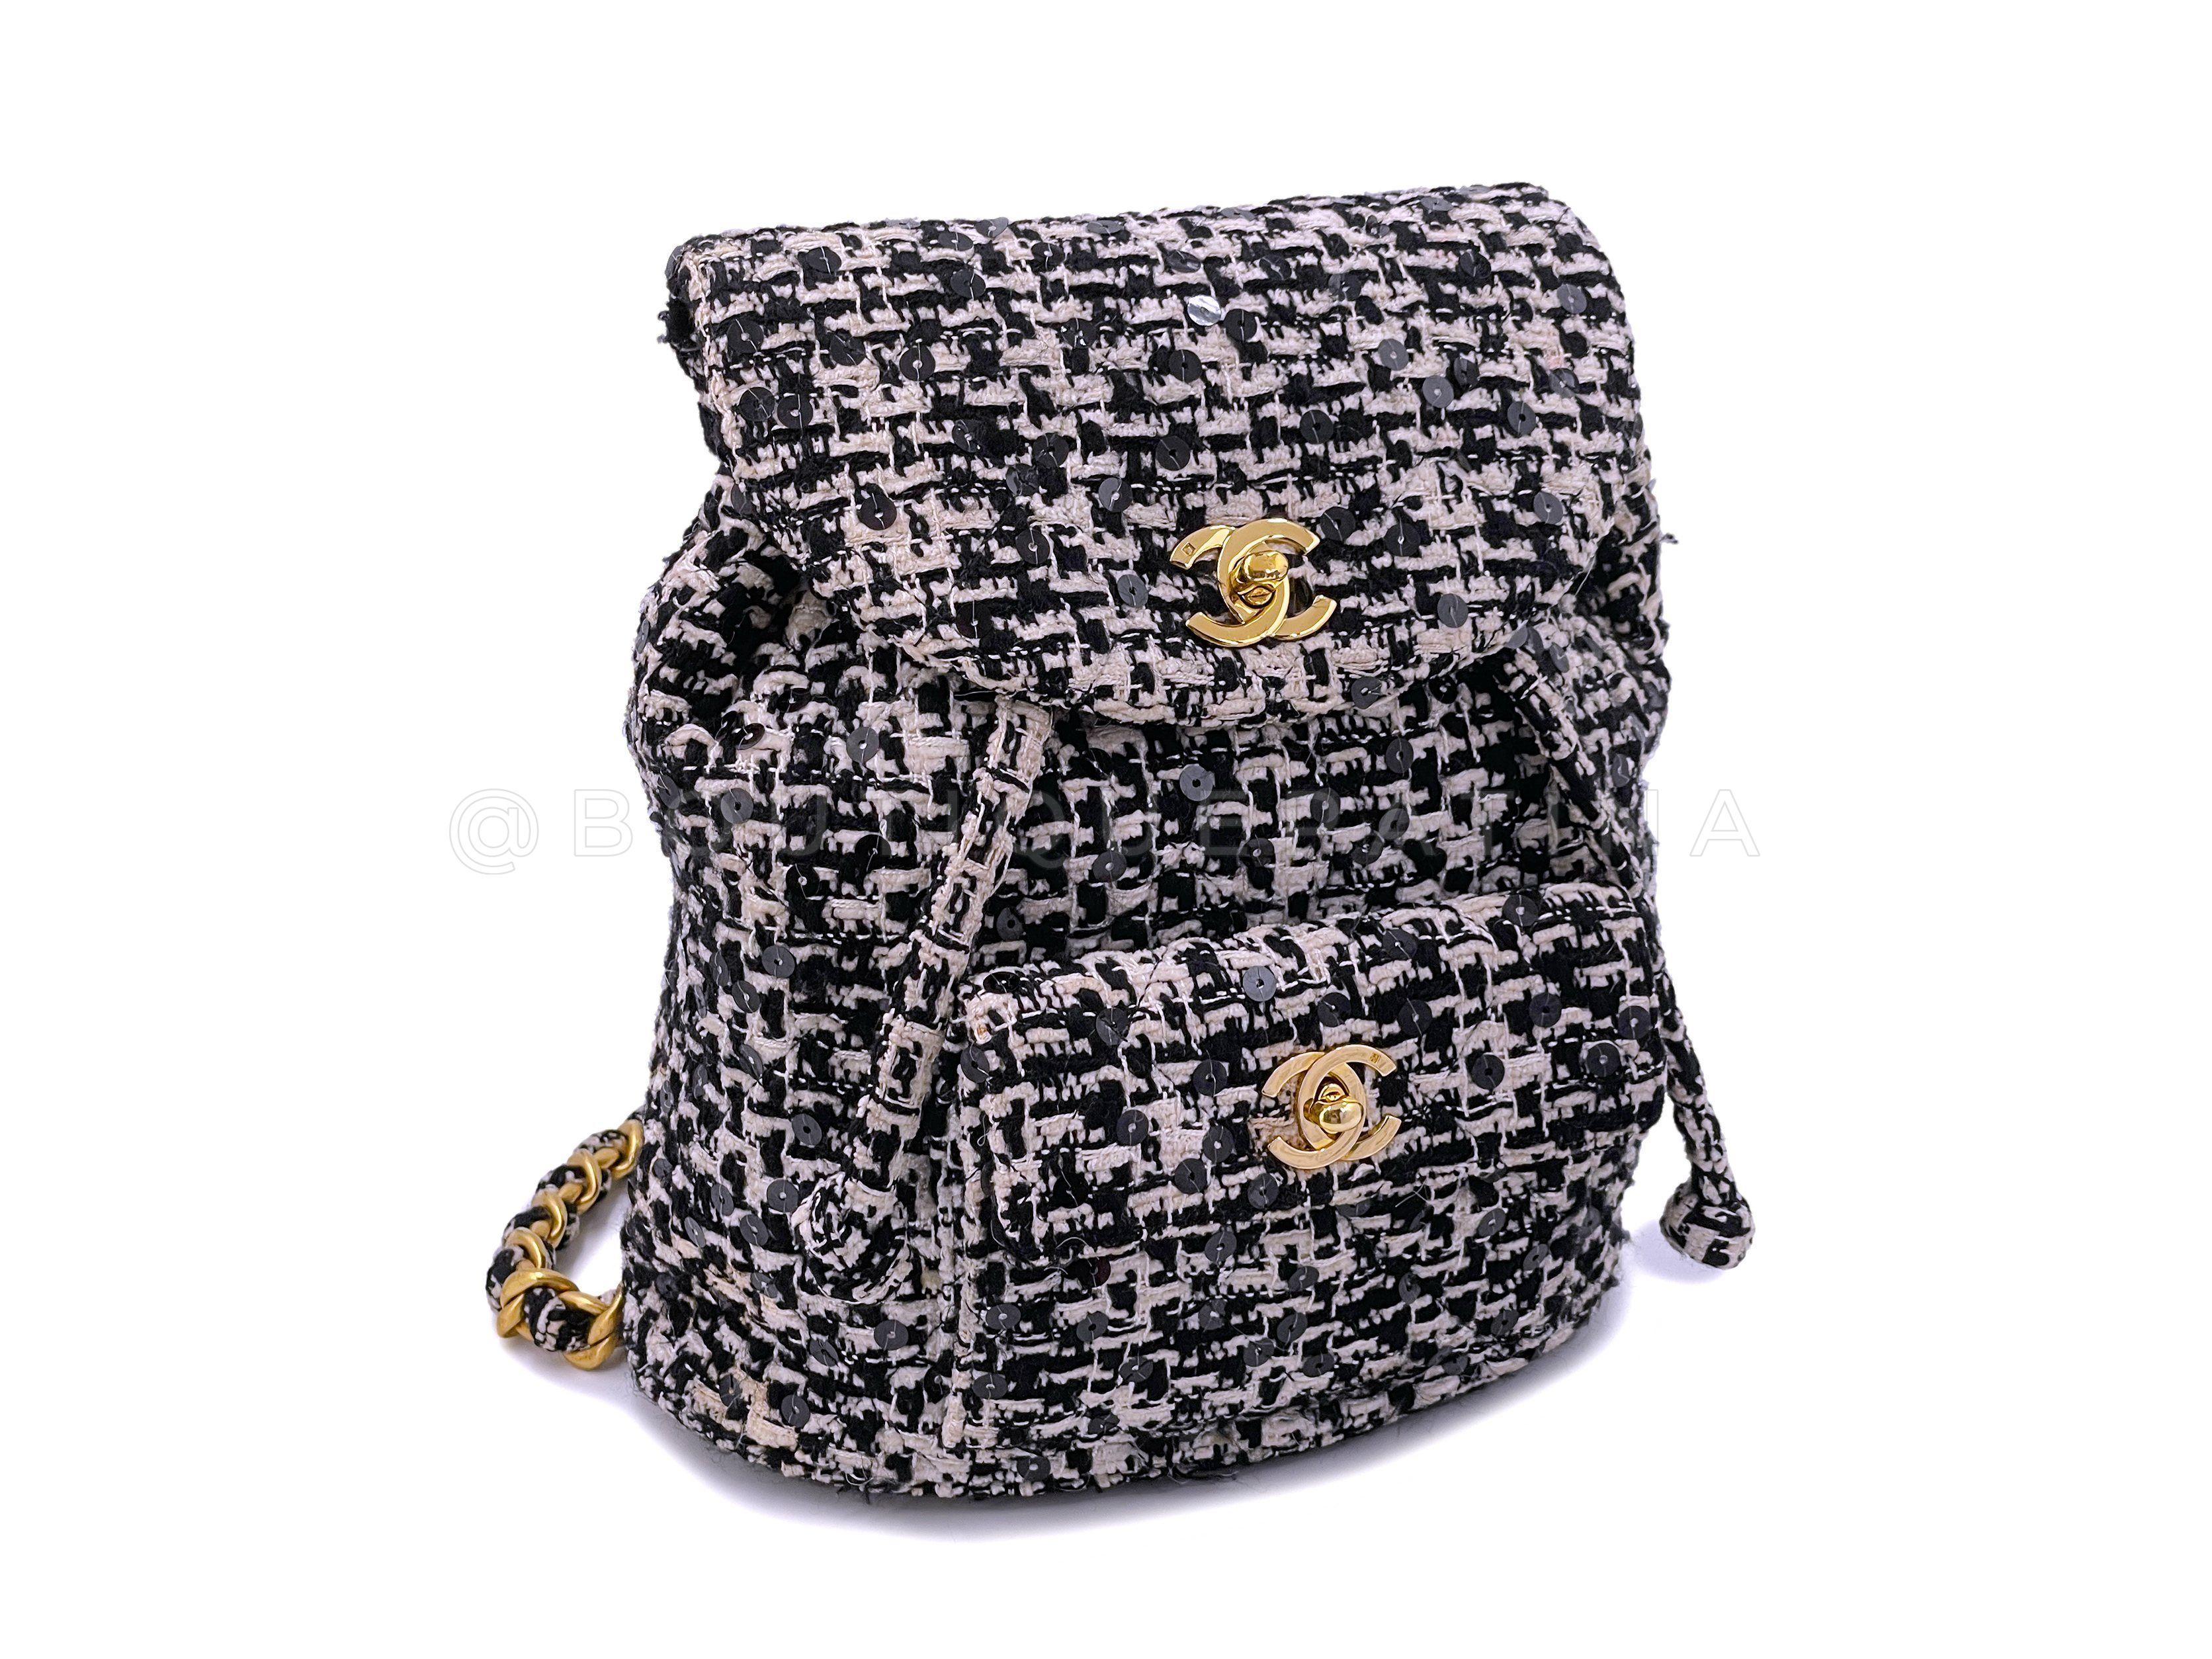 Chanel 1994 Vintage Black White Tweed Duma Backpack Bag 24k GHW 66338 In Excellent Condition For Sale In Costa Mesa, CA